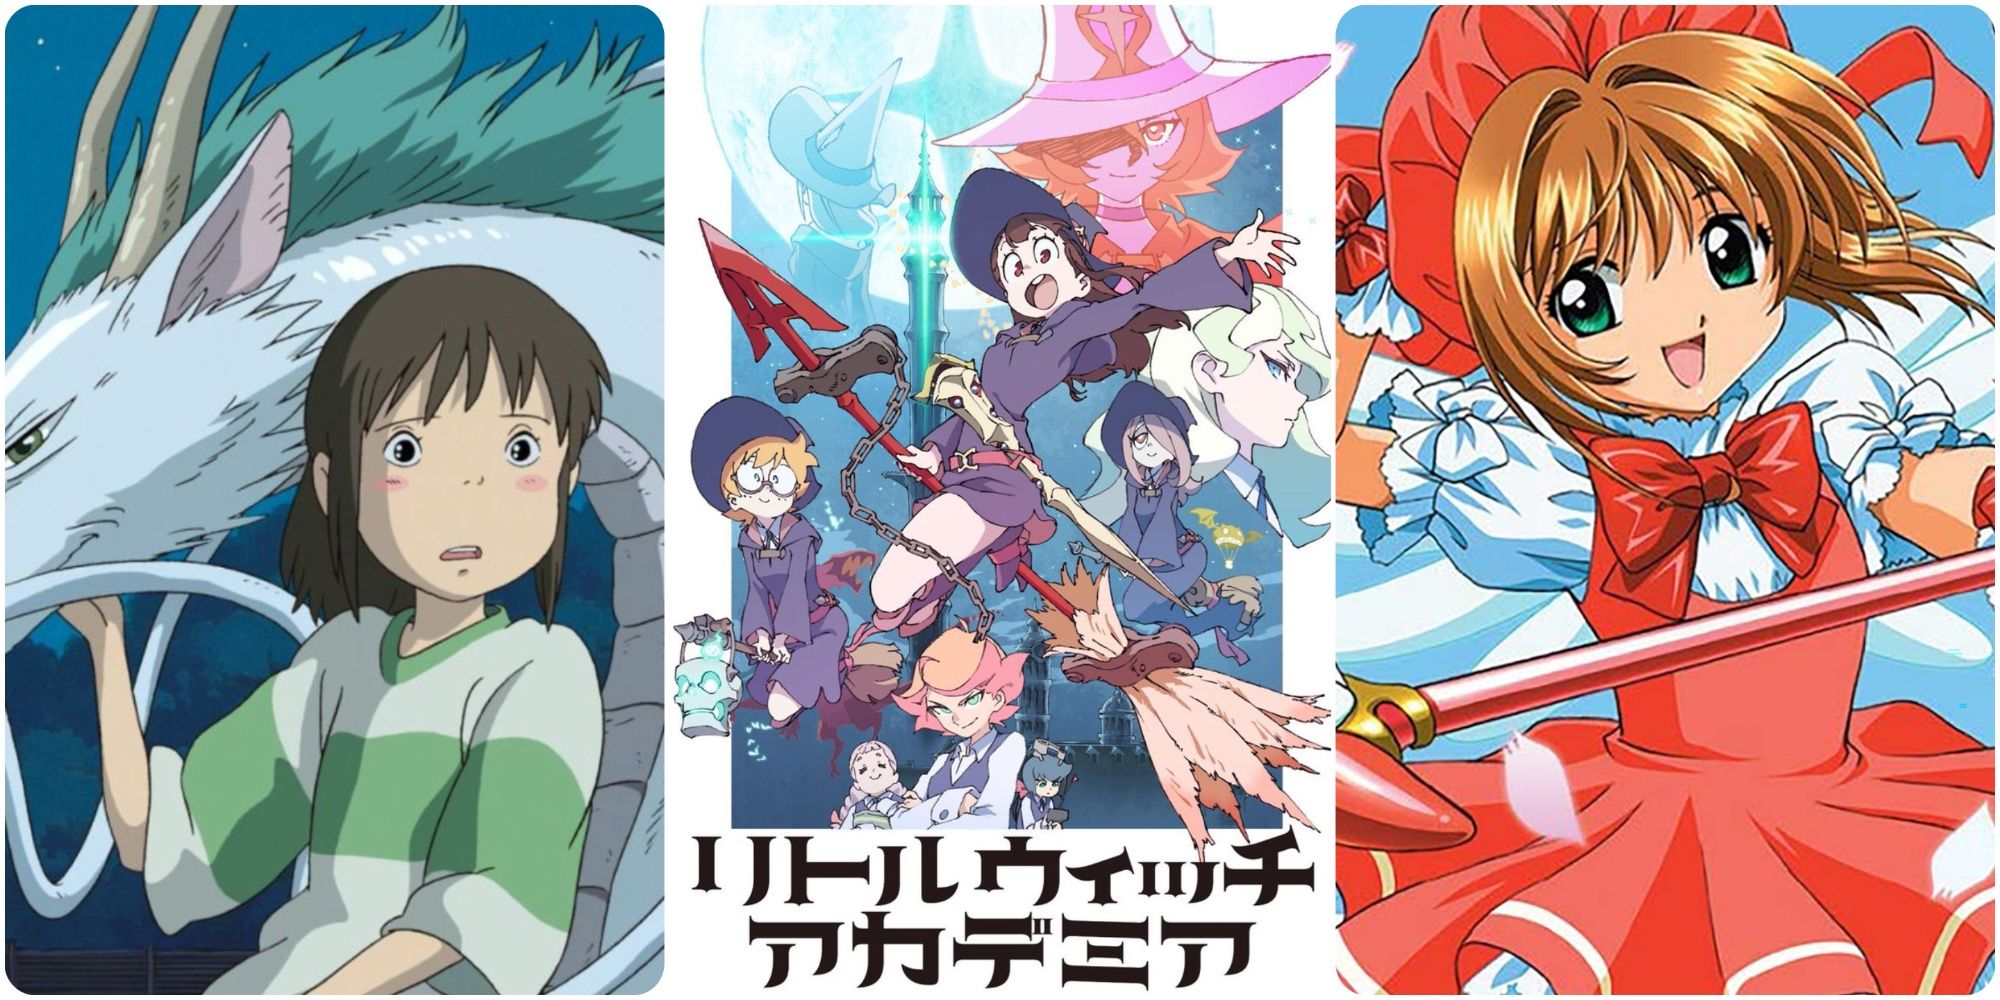 15 Anime Series to Check Out if You Love Movies About Witches